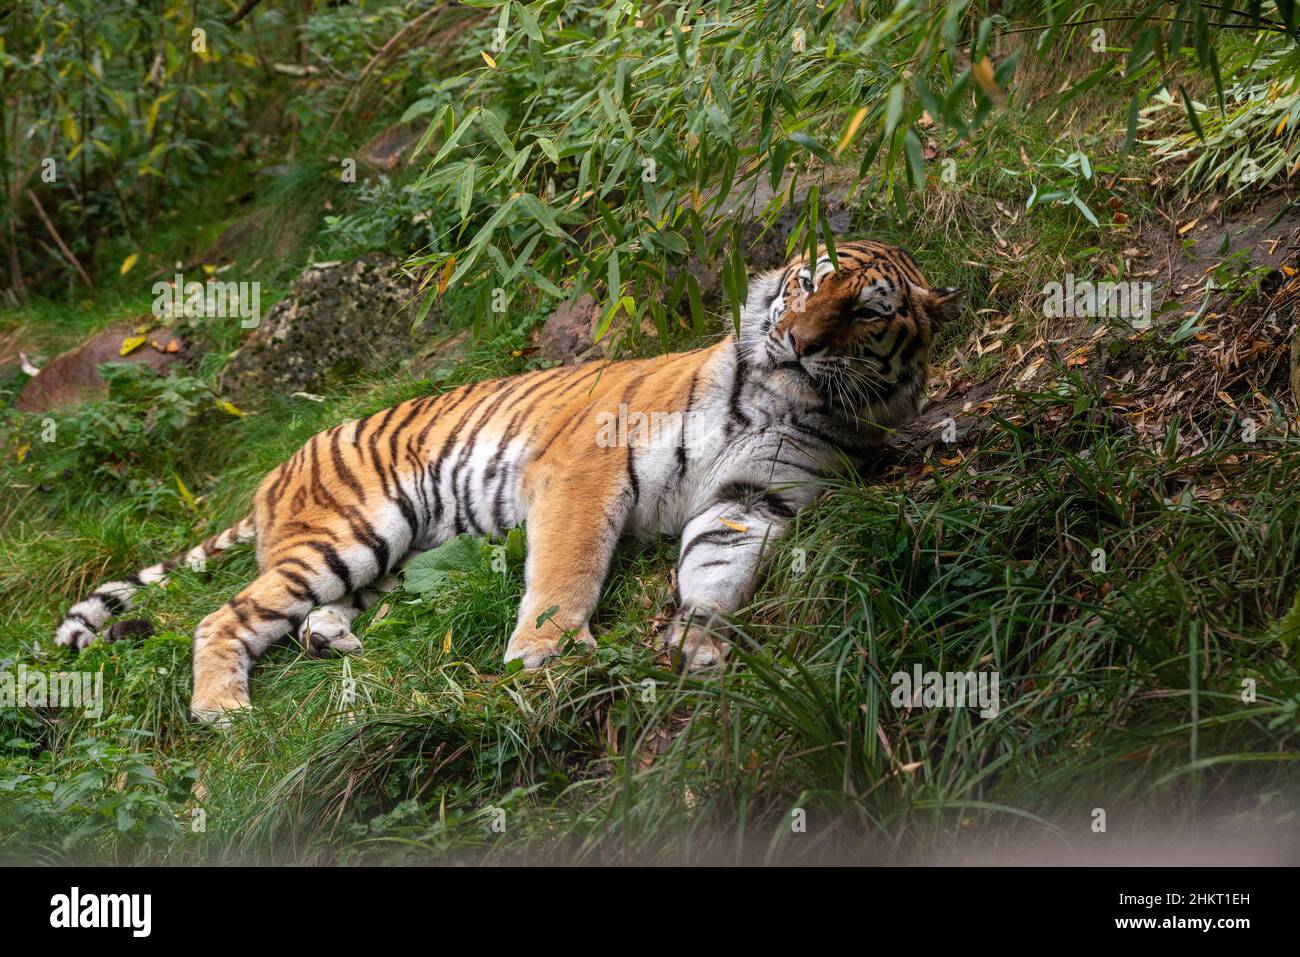 View of a beautiful tiger lying on the ground in the forest Stock Photo